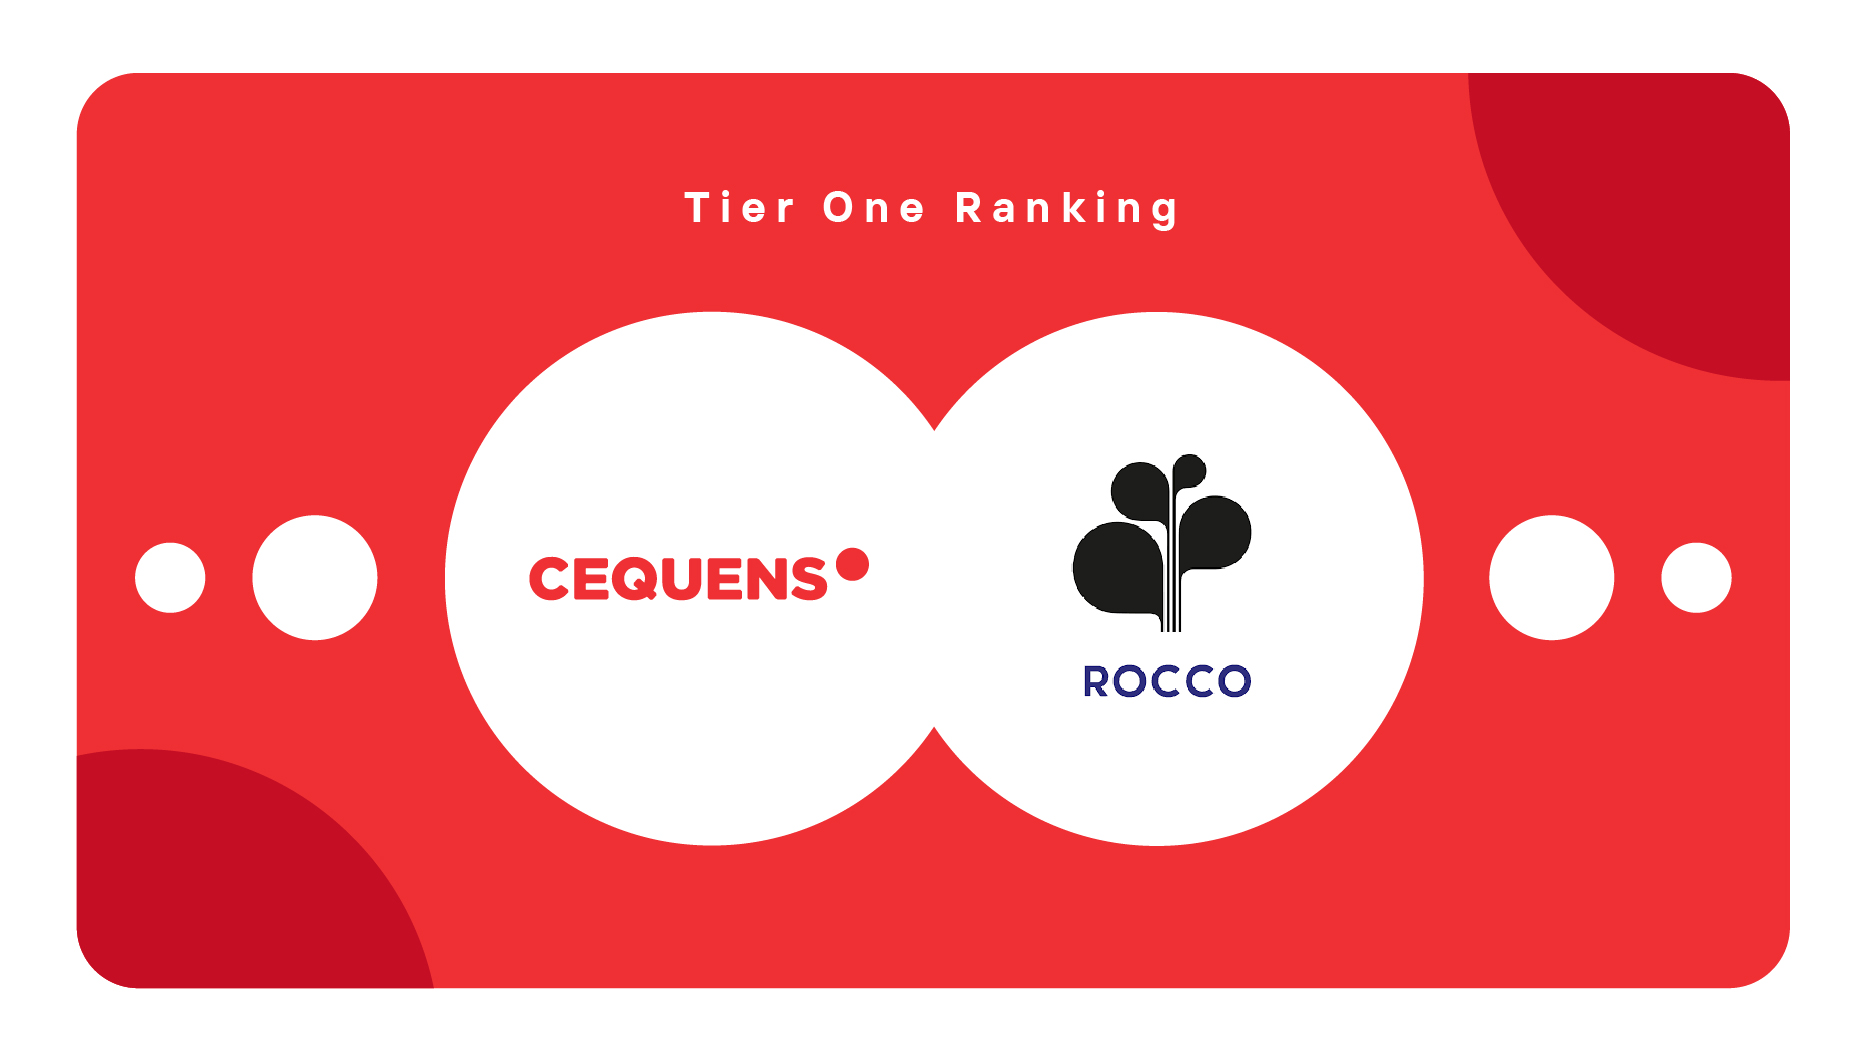 CEQUENS achieves Tier One status in ROCCO's A2P SMS Market Impact reports